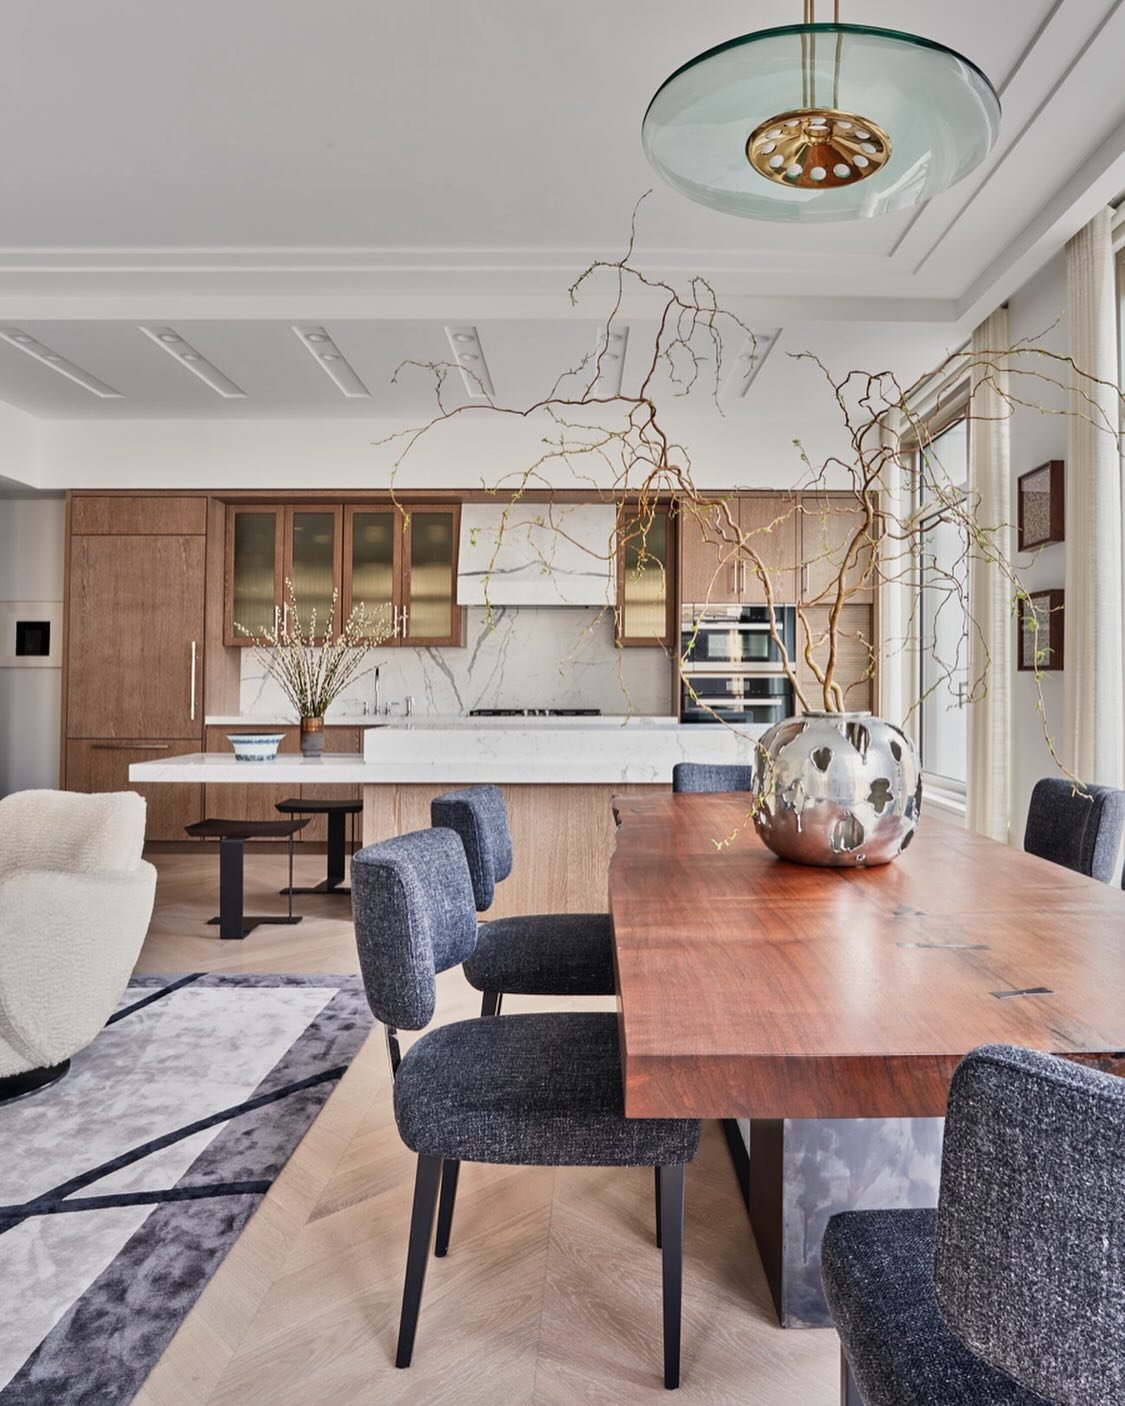 Artworks by Gabriel de la Mora and Mary Corse join stools by Pierre Chareau, a chair by Vladimir Kagan, an important Fontana Arte light fixture by Max Ingrand, and commissioned dining table by Stefan Rurak in a Noho Loft.  The dining chairs are custo